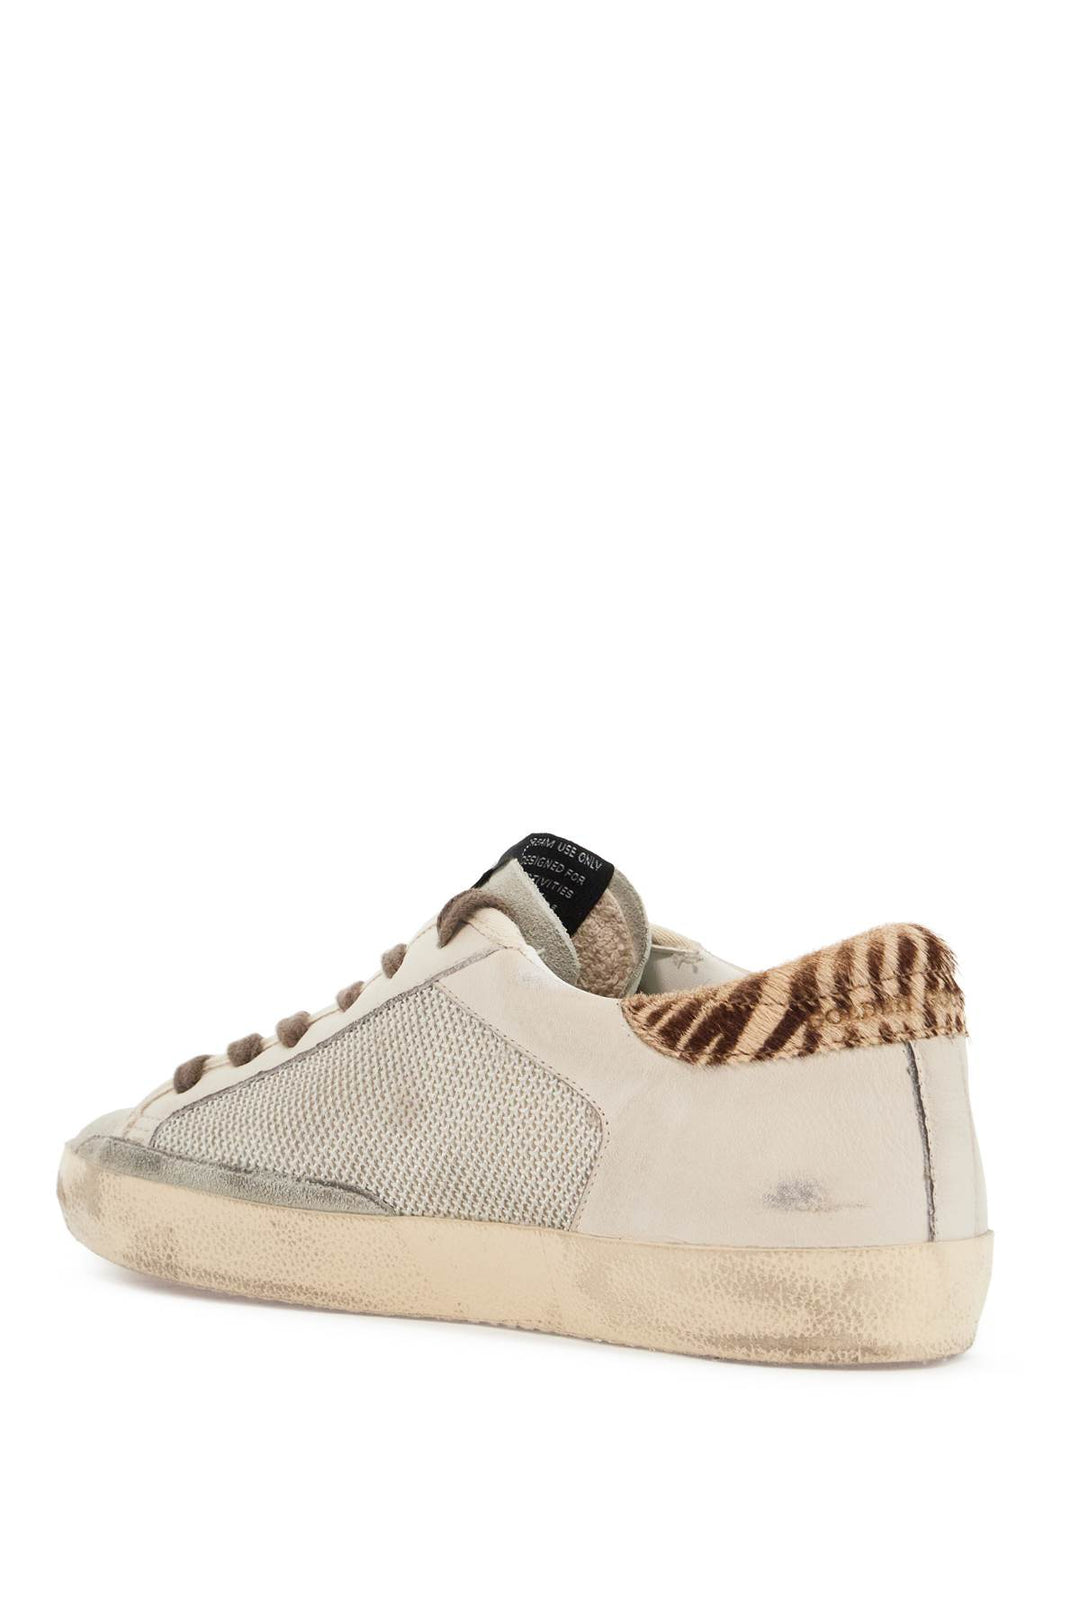 Golden Goose Super Star Canvas And Leather Sneakers   Neutral